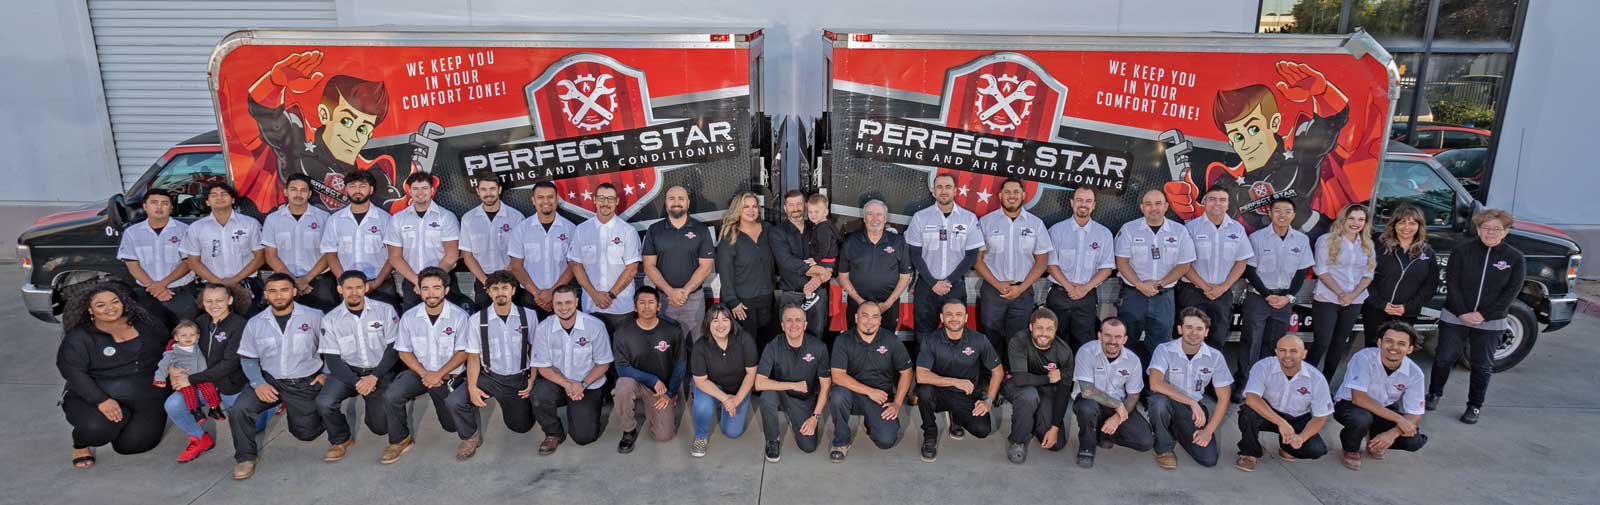 Members of the Perfect Star Team, including Senior Comfort Advisers Ray Kinder, Danny Mendoza & Mike Jestadt.